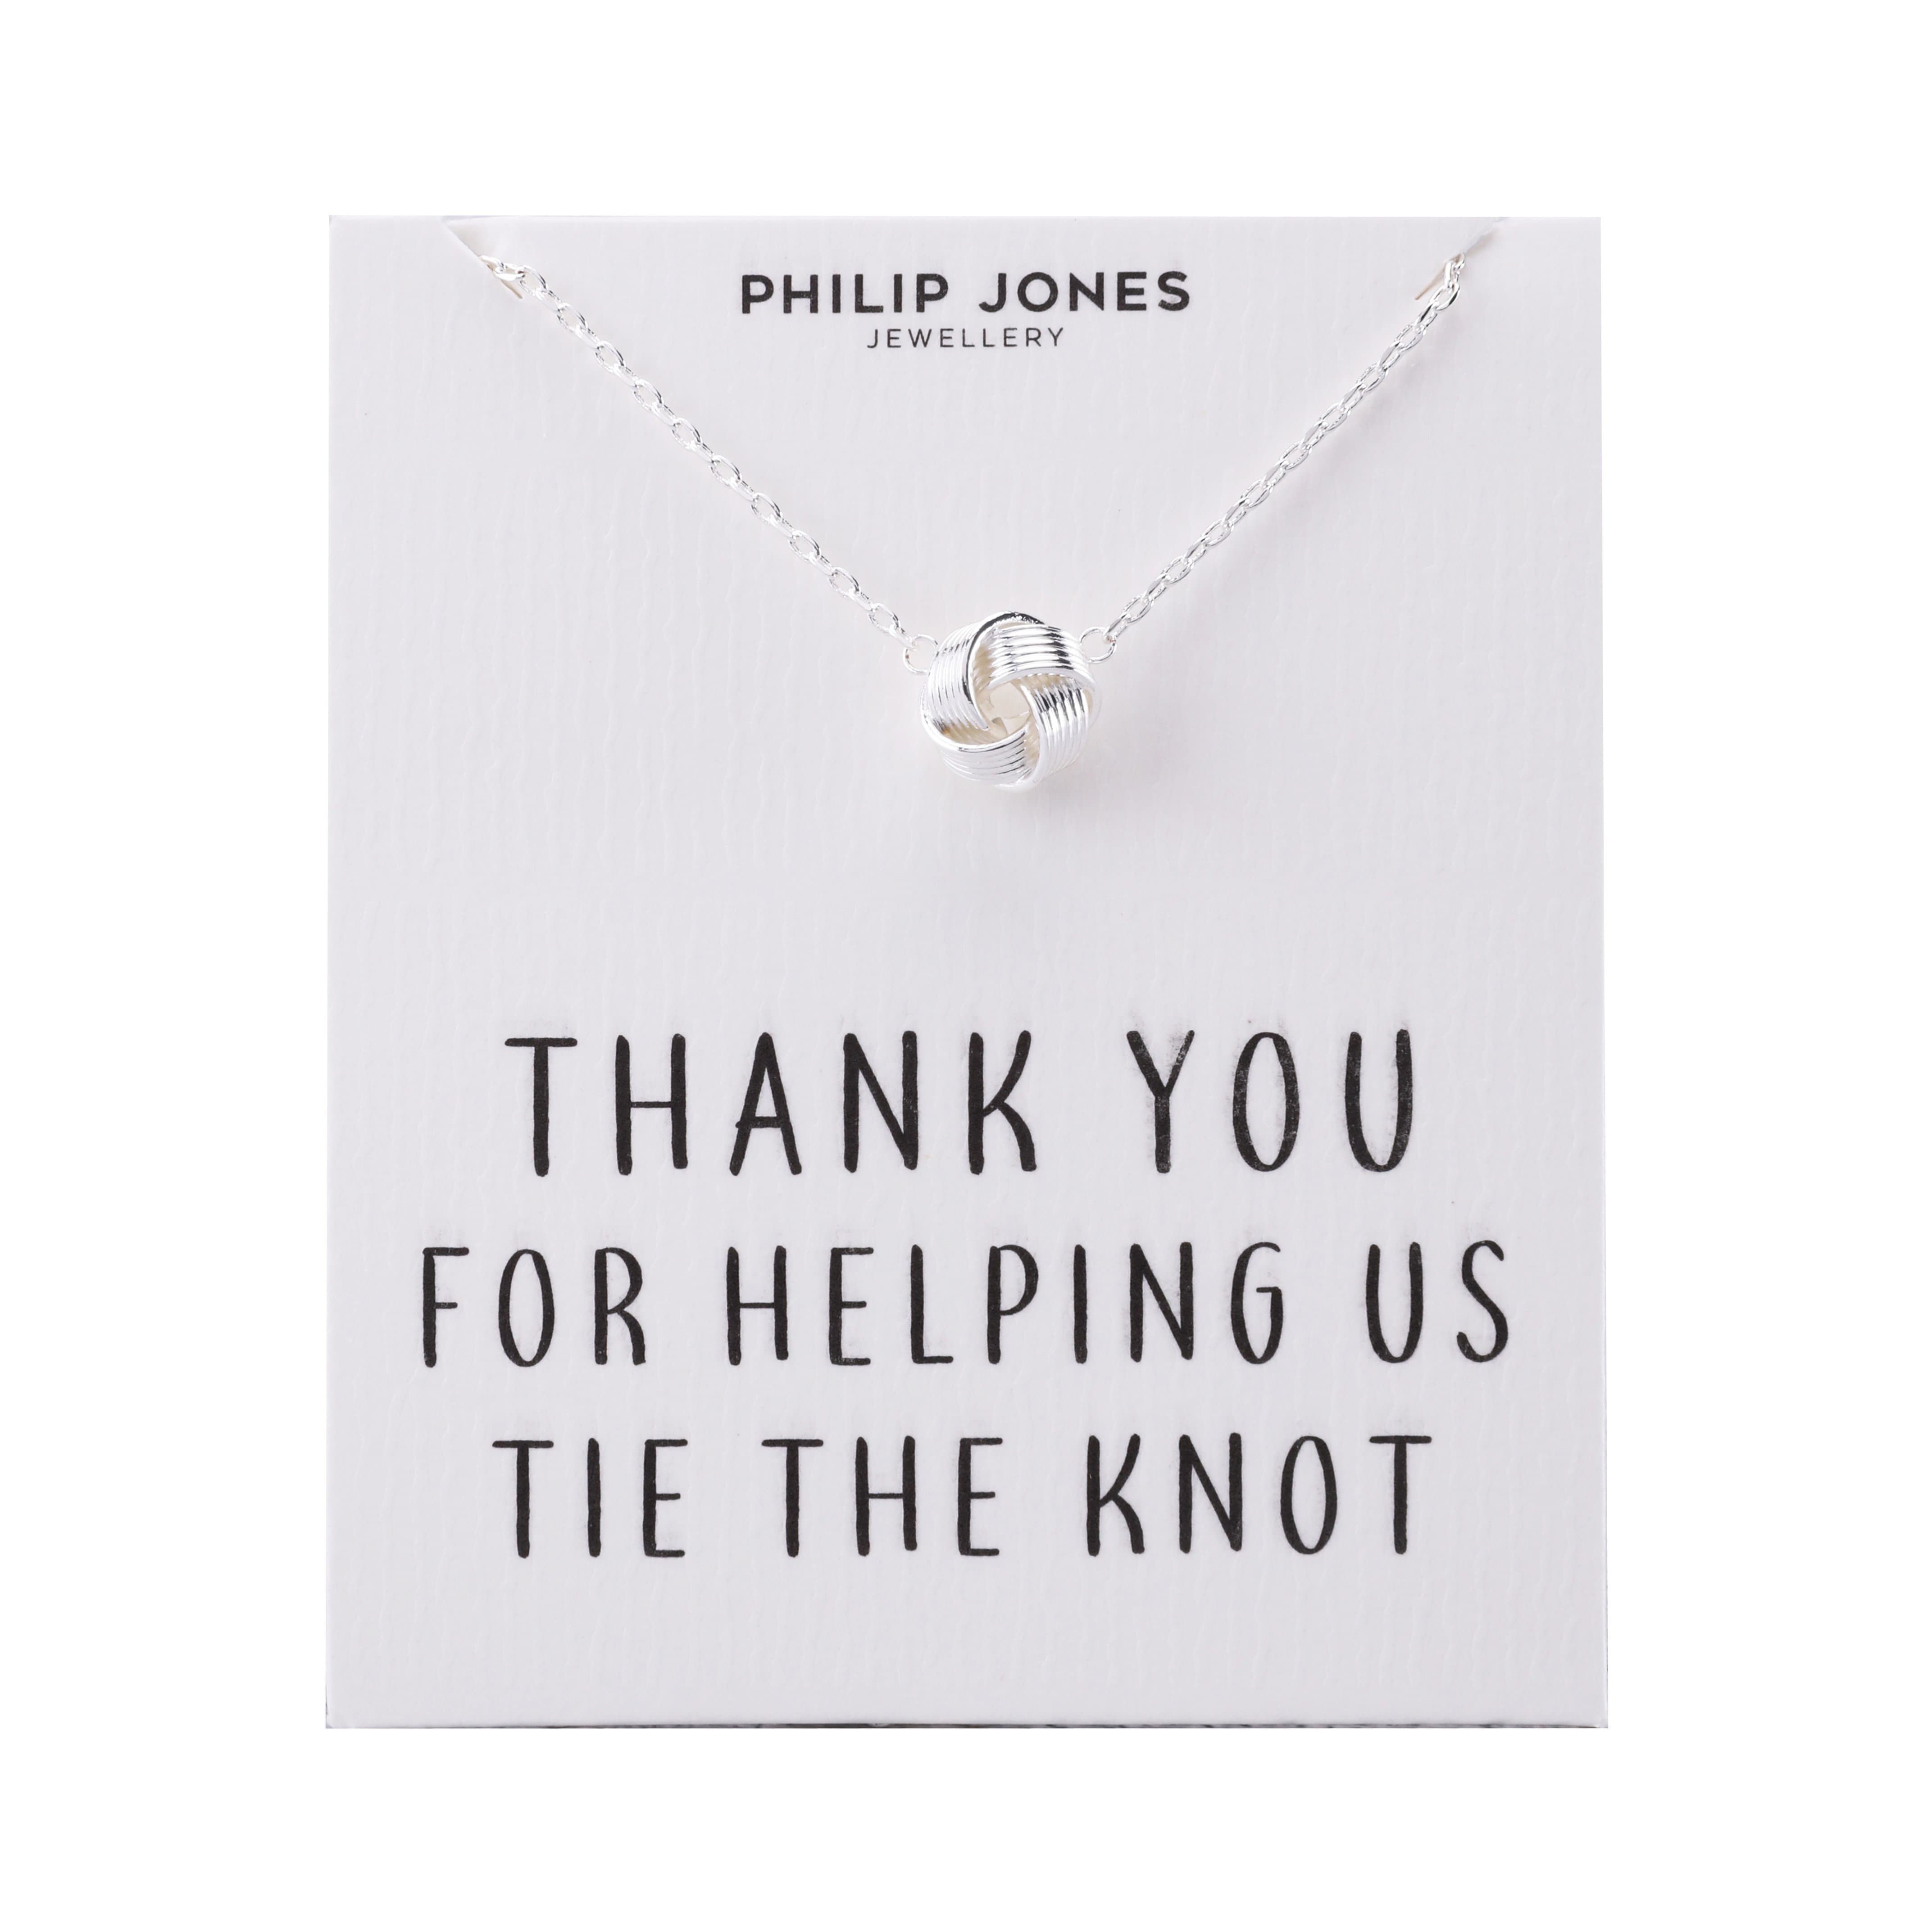 Silver Plated Thank You for Helping us Tie The Knot Necklace with Quote Card by Philip Jones Jewellery